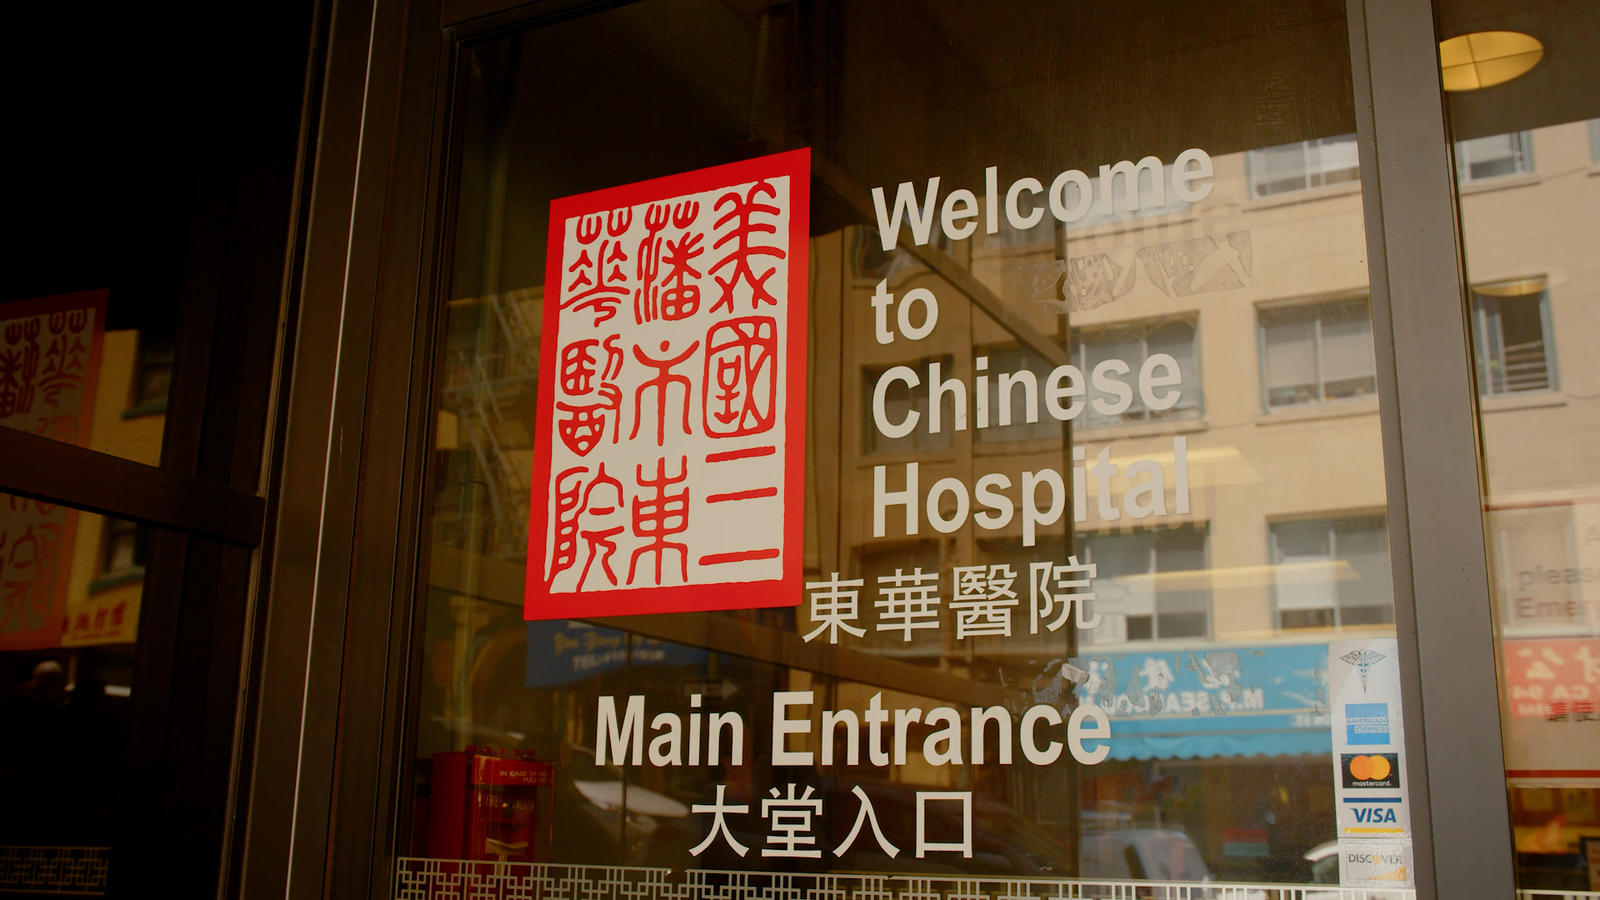 Chinese Hospital in San Francisco has been providing healthcare services to the oldest Chinatown in America, celebrating its 125th anniversary. [Video]